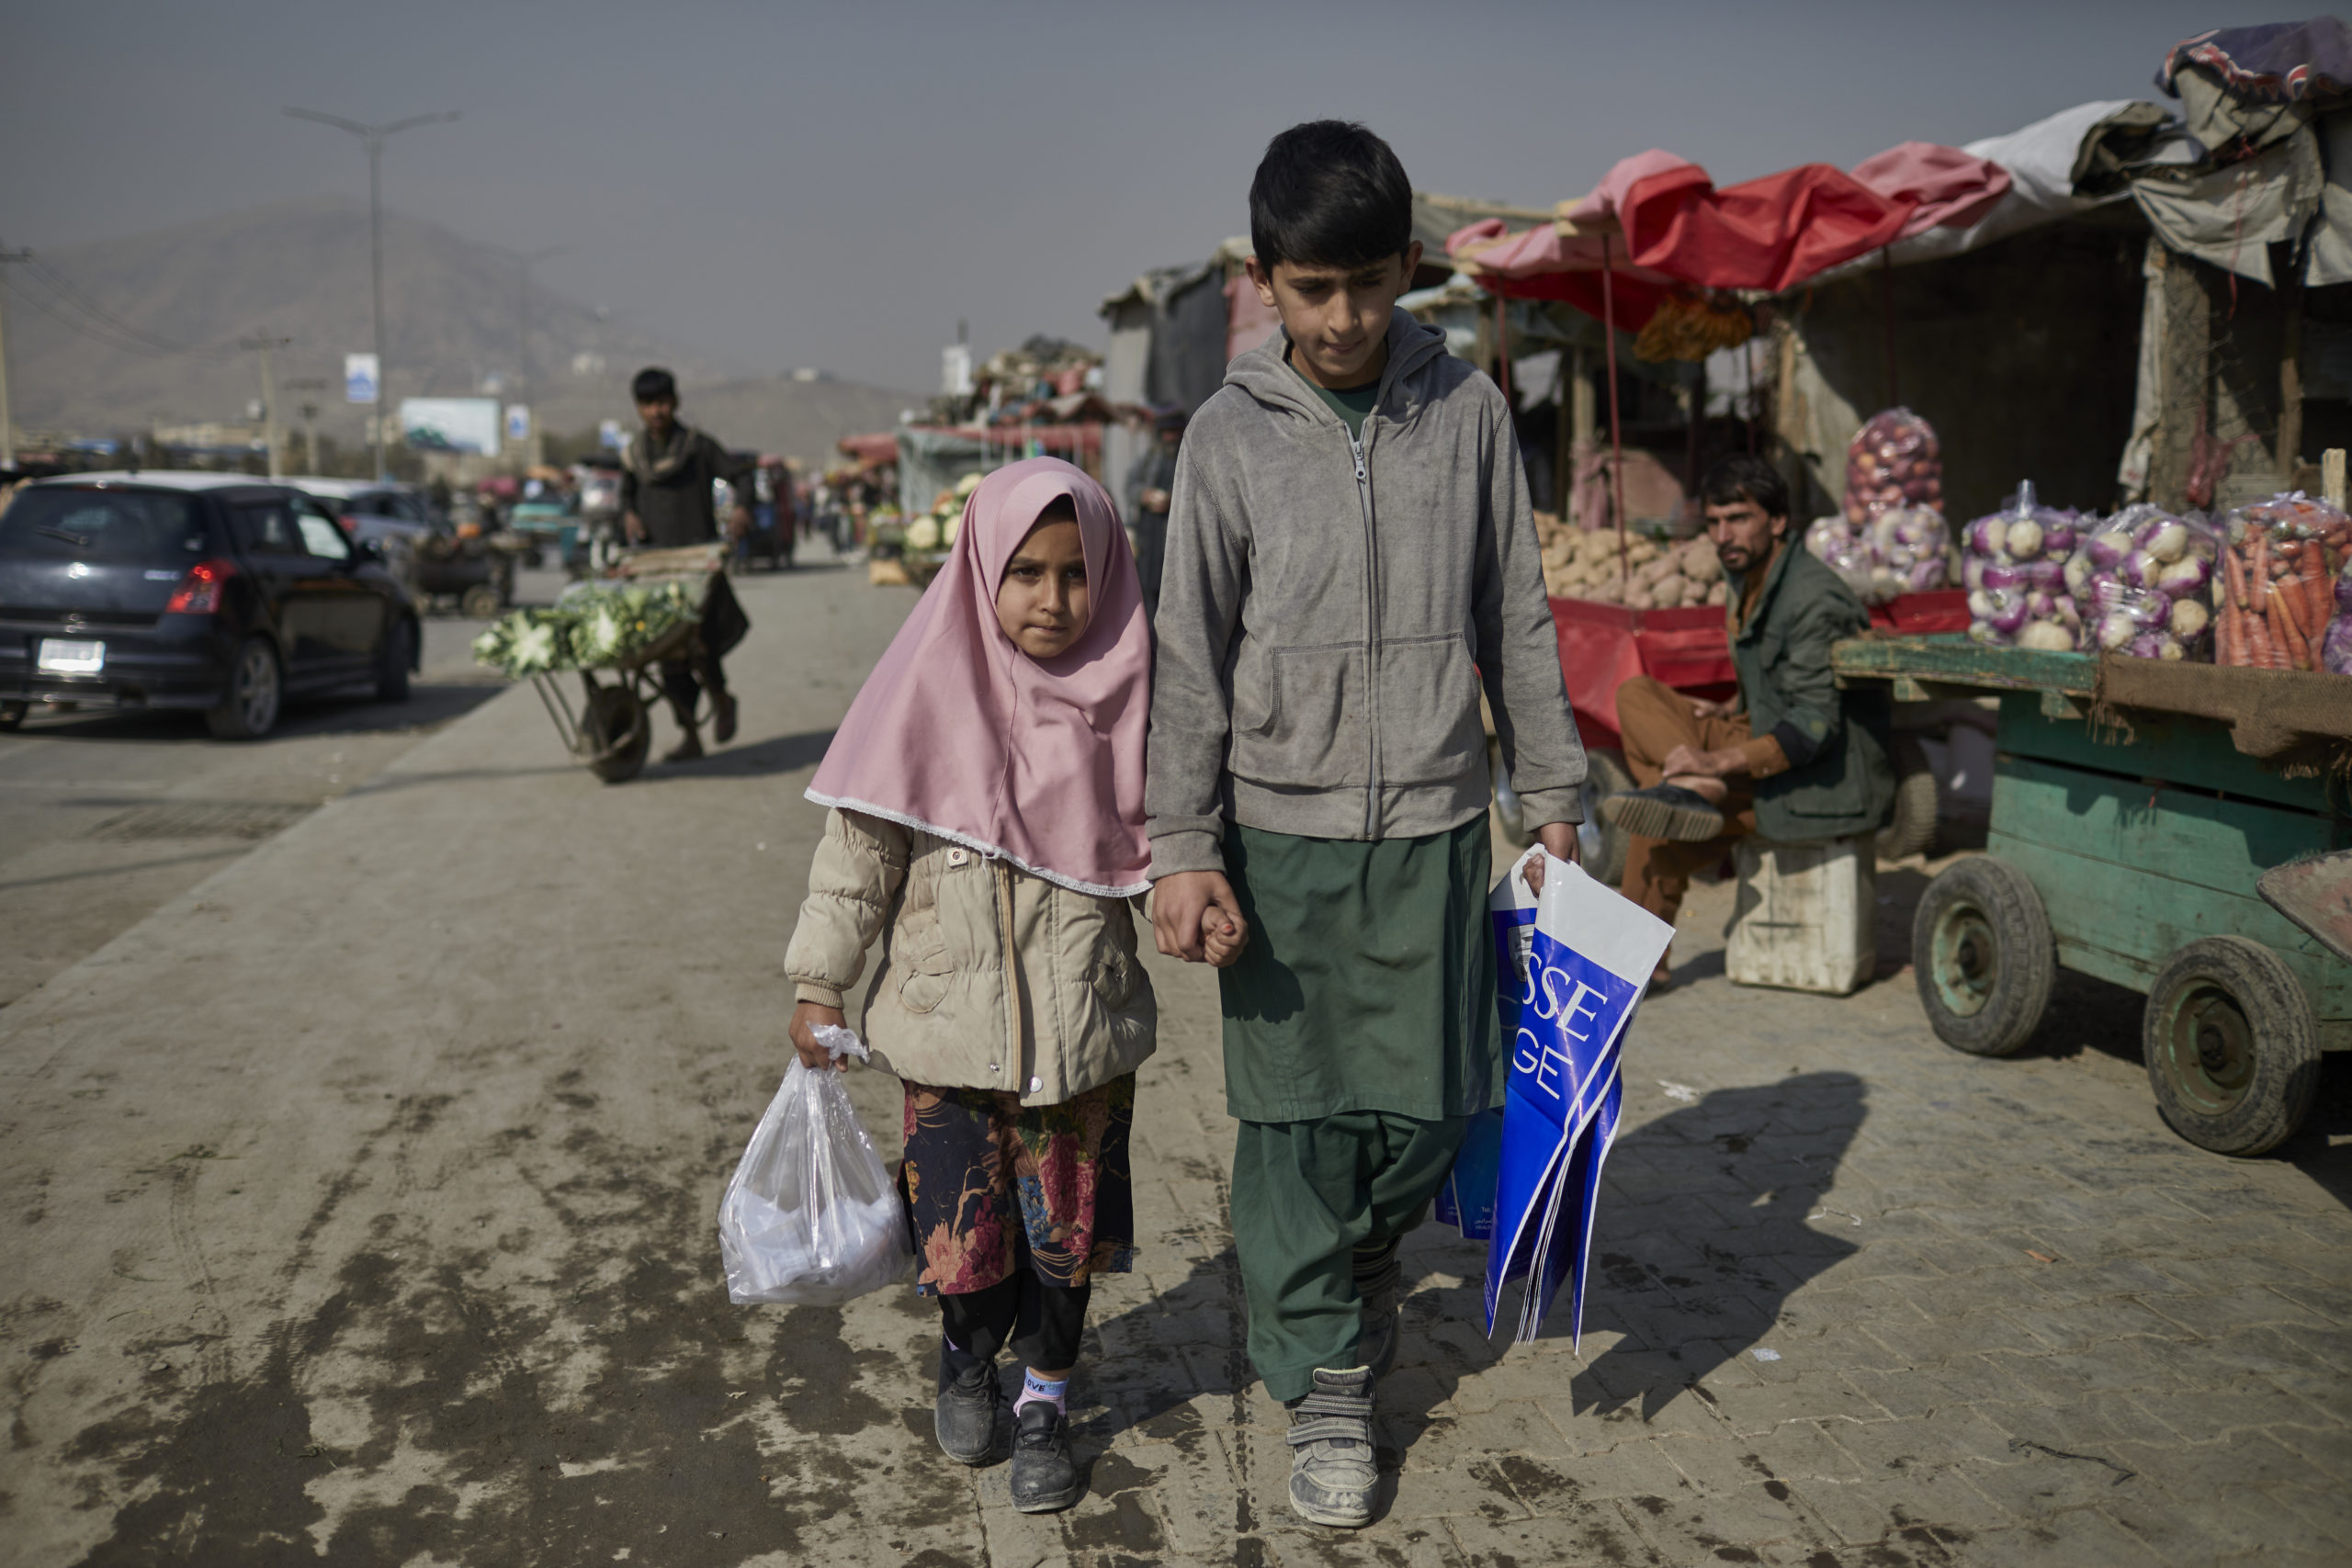 Hajira and Matiullah hold hands as they walk through a marketplace in Afghanistan